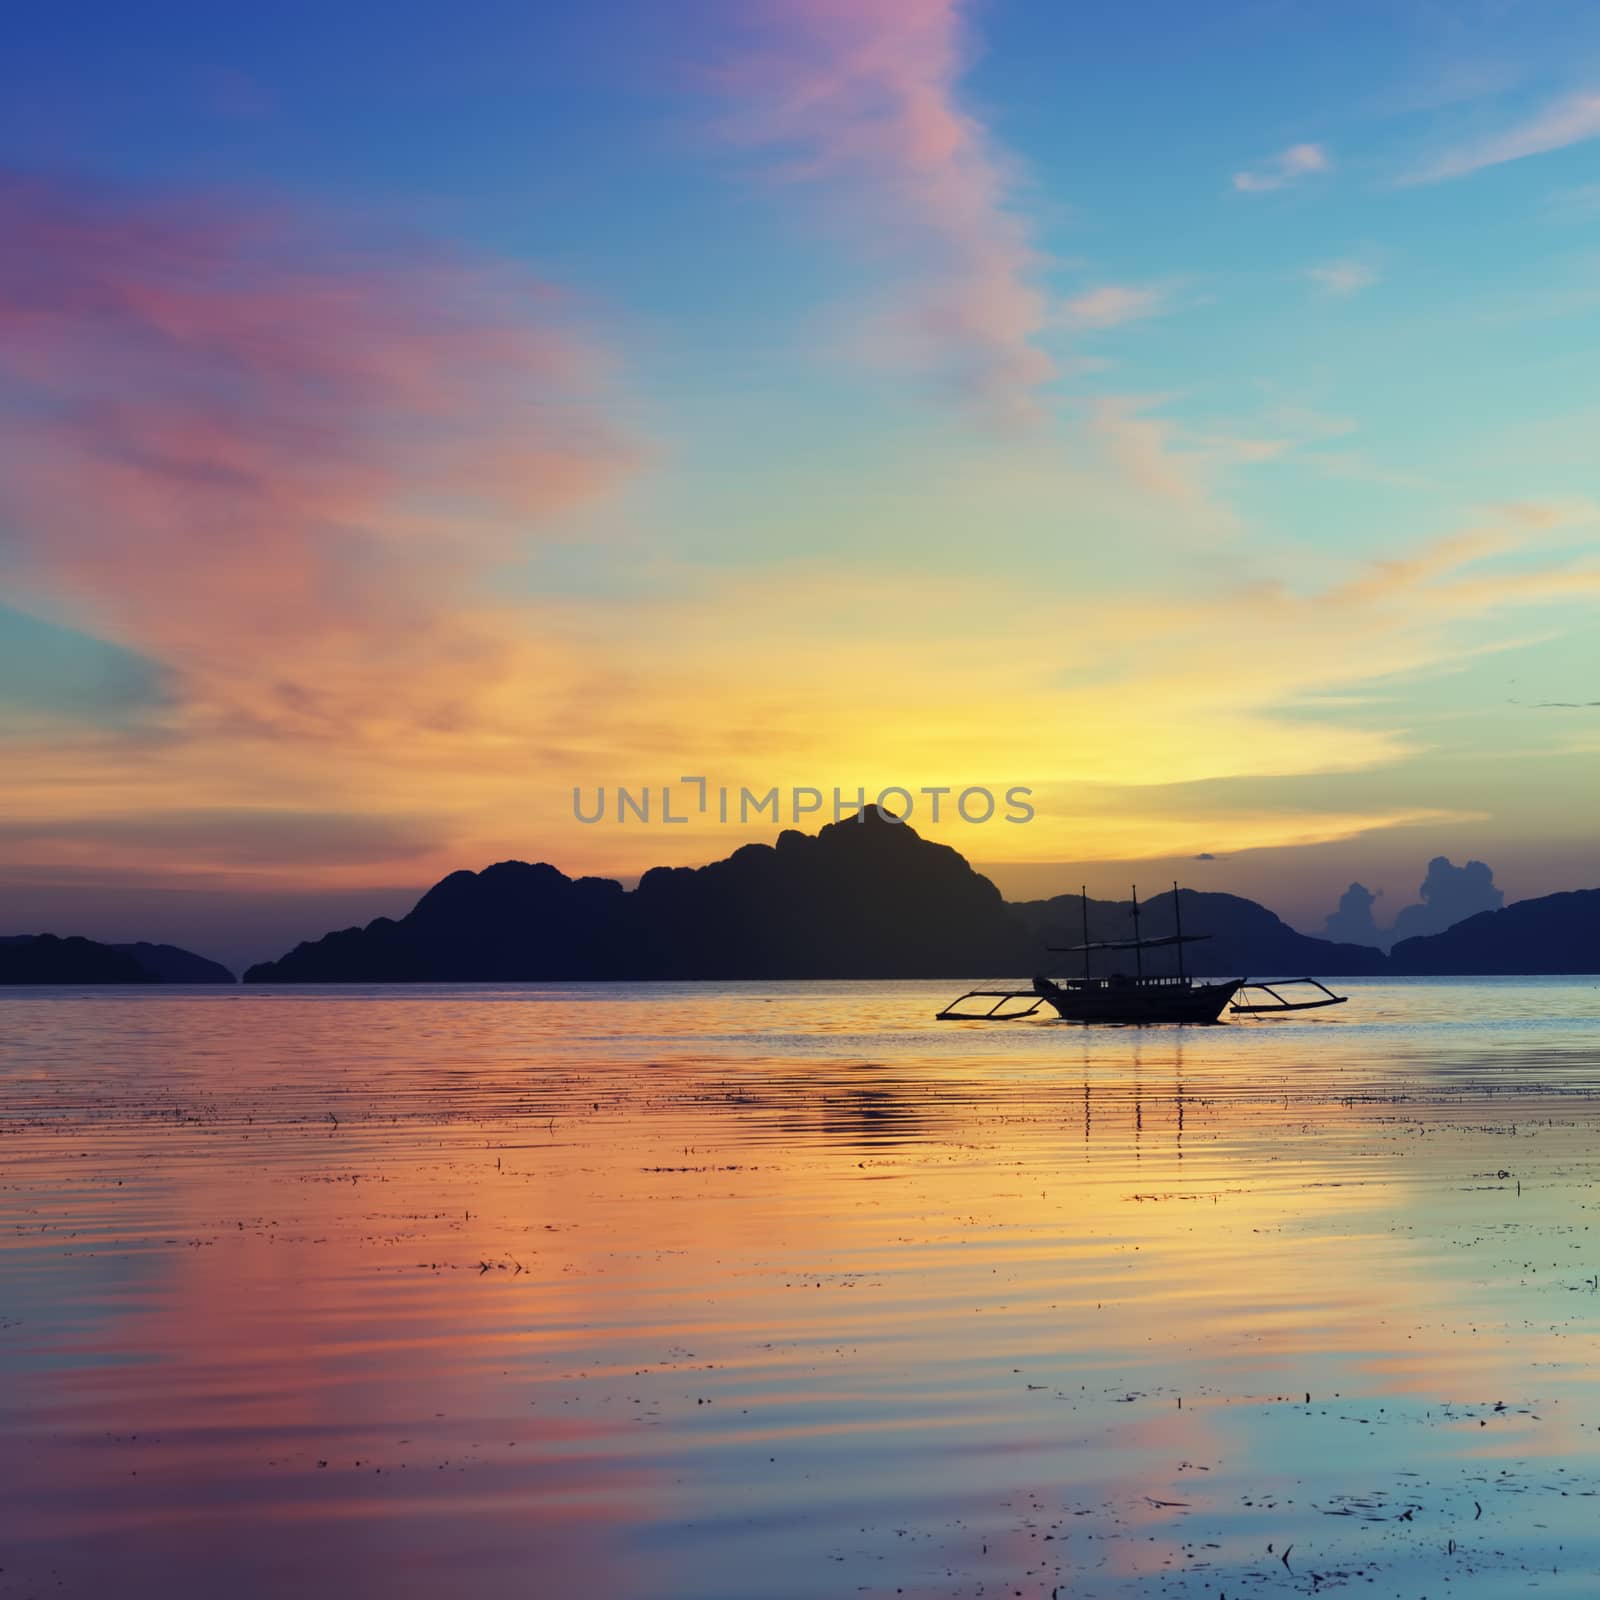  Sunset in El Nido, Palawan - Philippines by fazon1